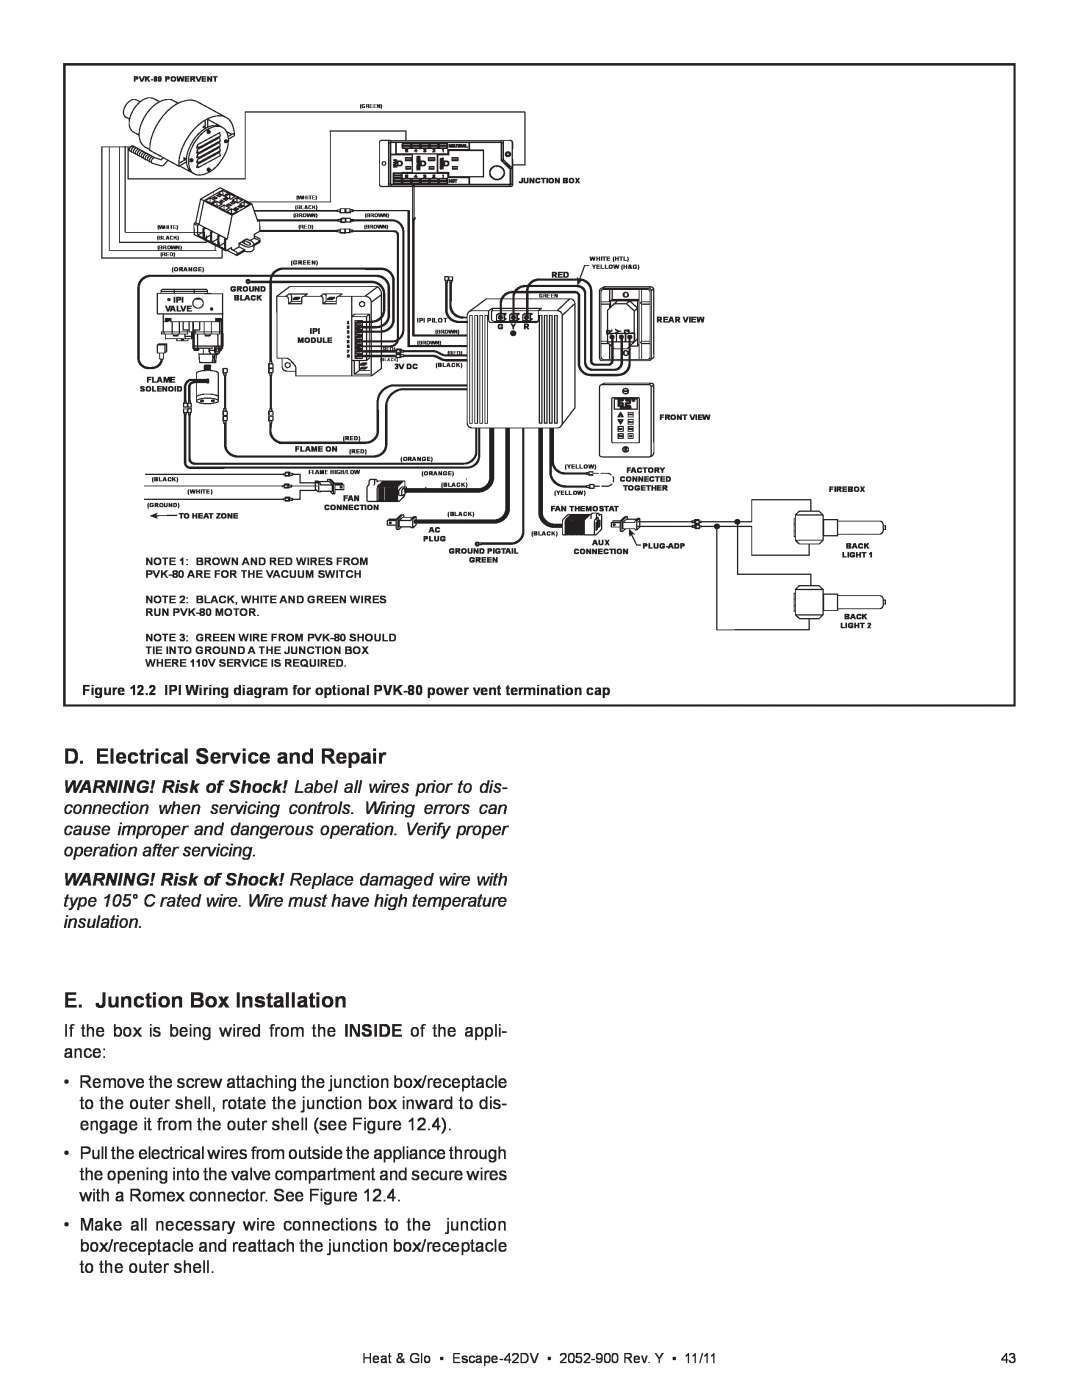 Heat & Glo LifeStyle Escape-42DVLP owner manual D. Electrical Service and Repair, E. Junction Box Installation 